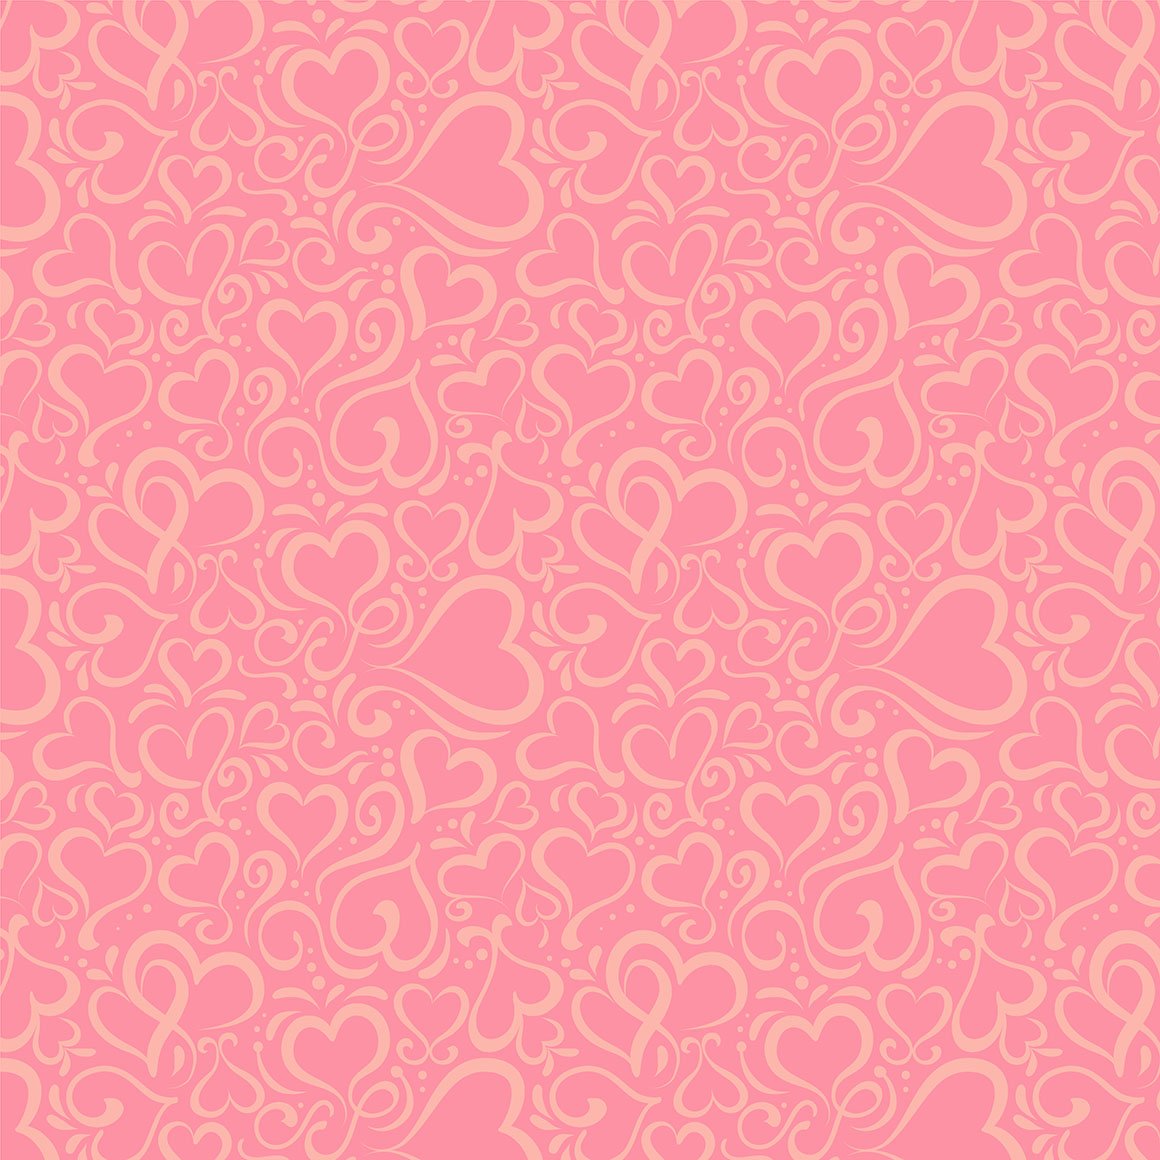 Stylish outline hearts on a pink background.